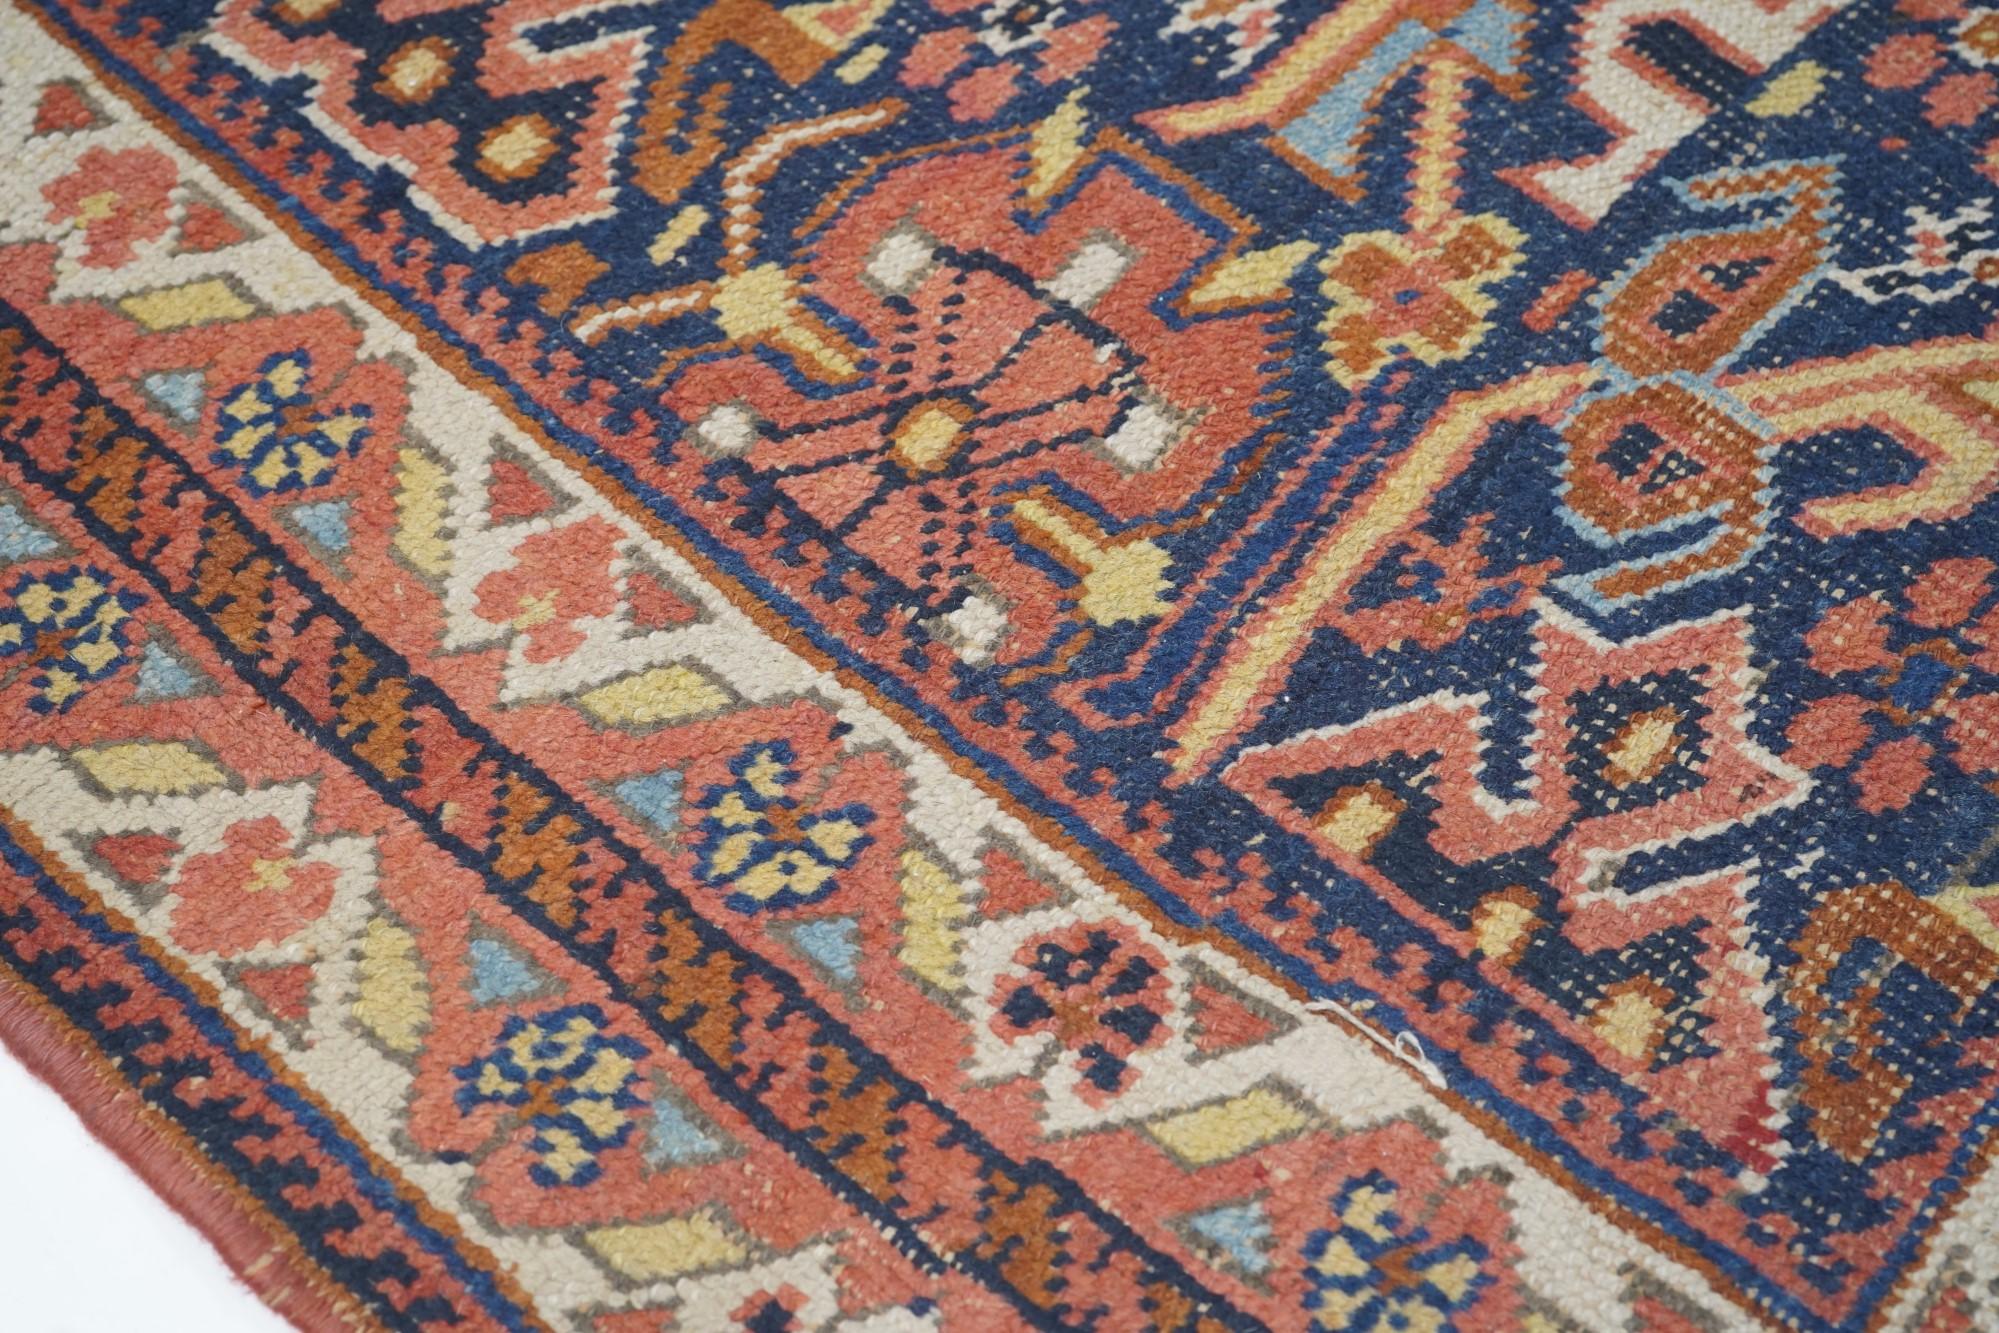 Antique Afshar Rug 4'2'' x 5'9'' In Excellent Condition For Sale In New York, NY